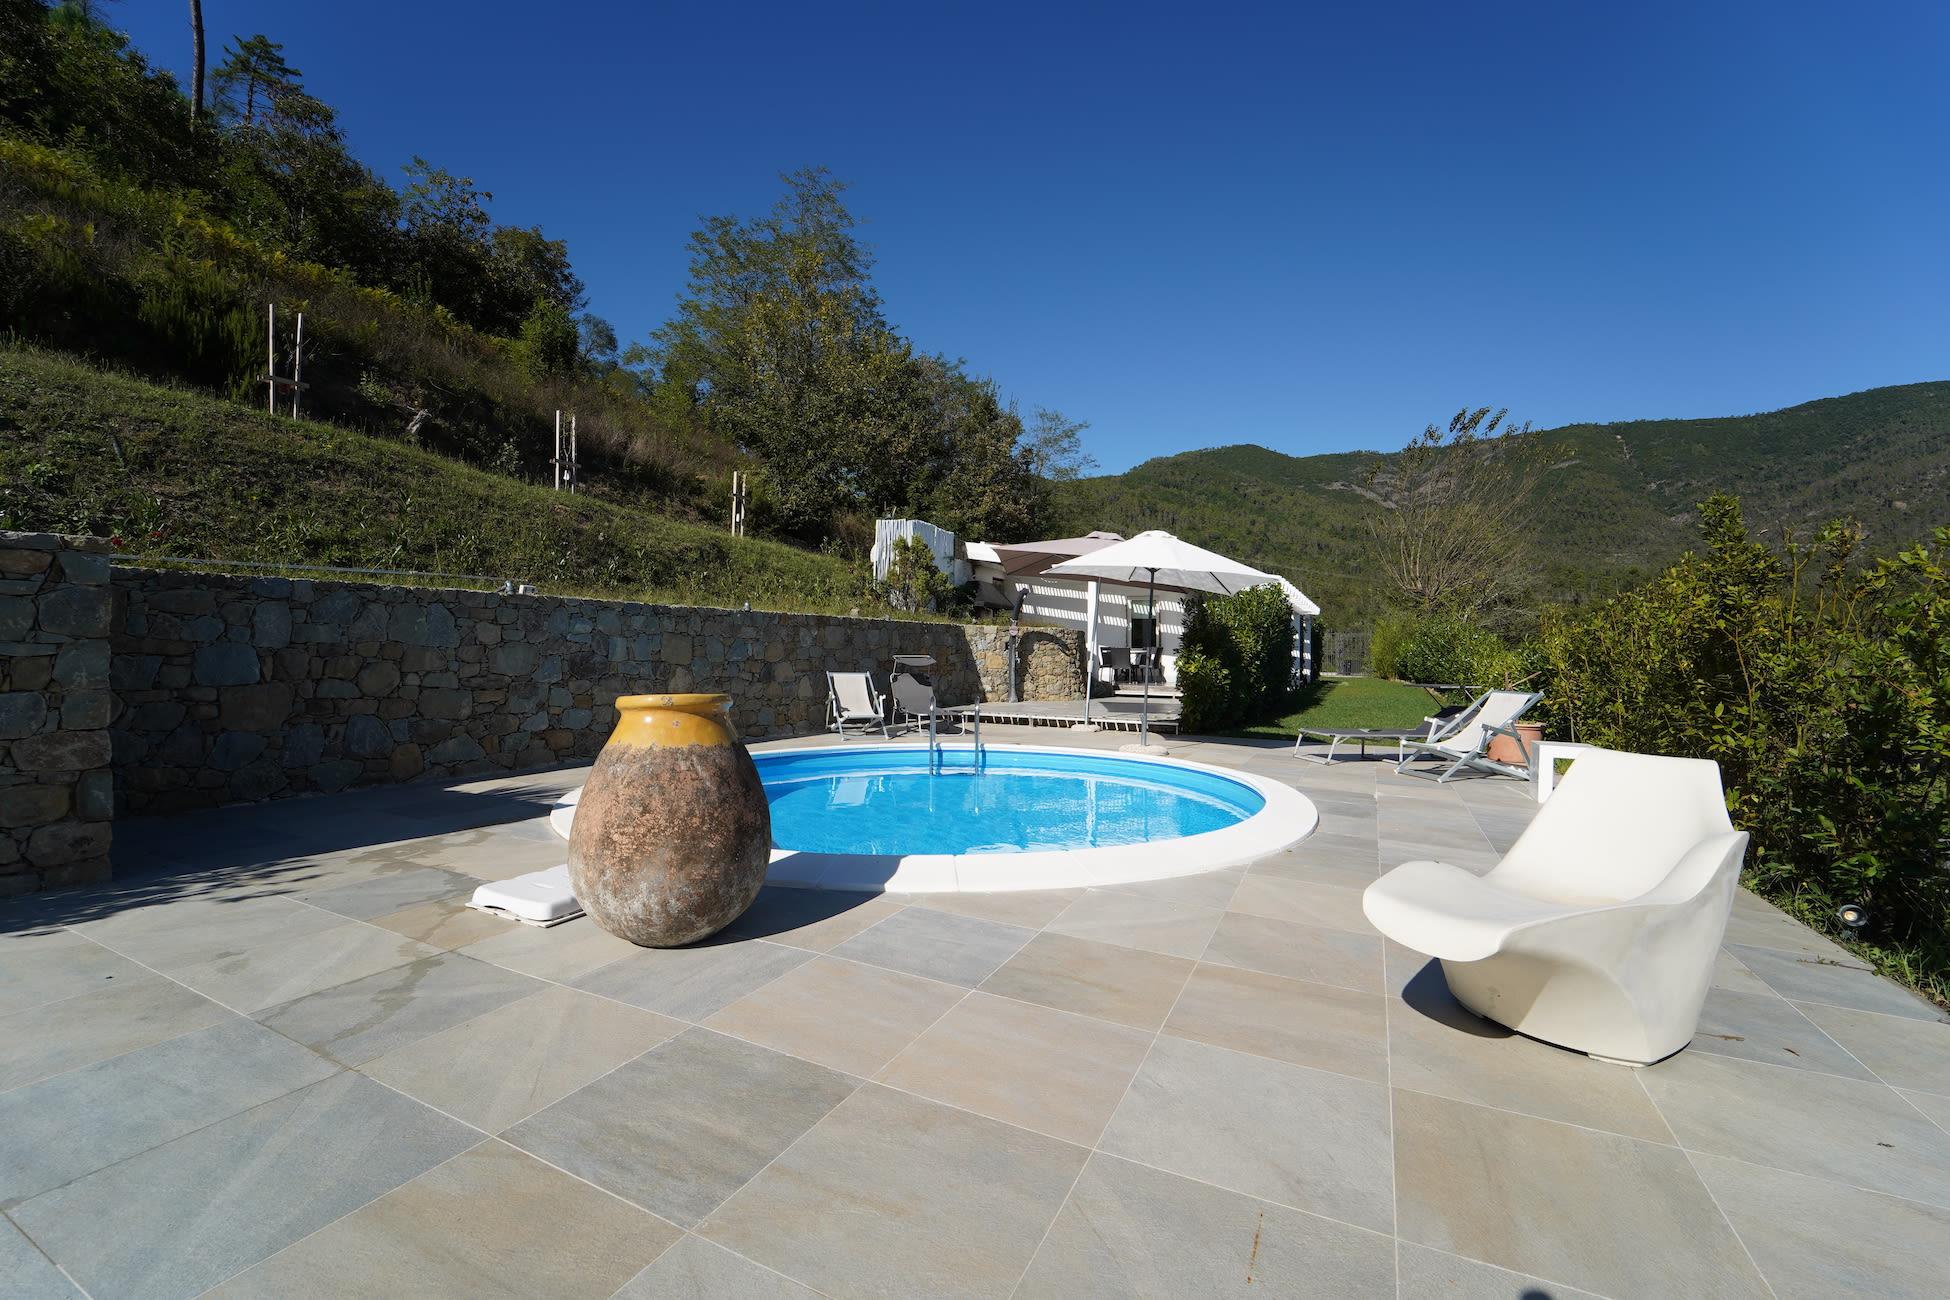 Property Image 2 - Secluded retreat overlooking the hills